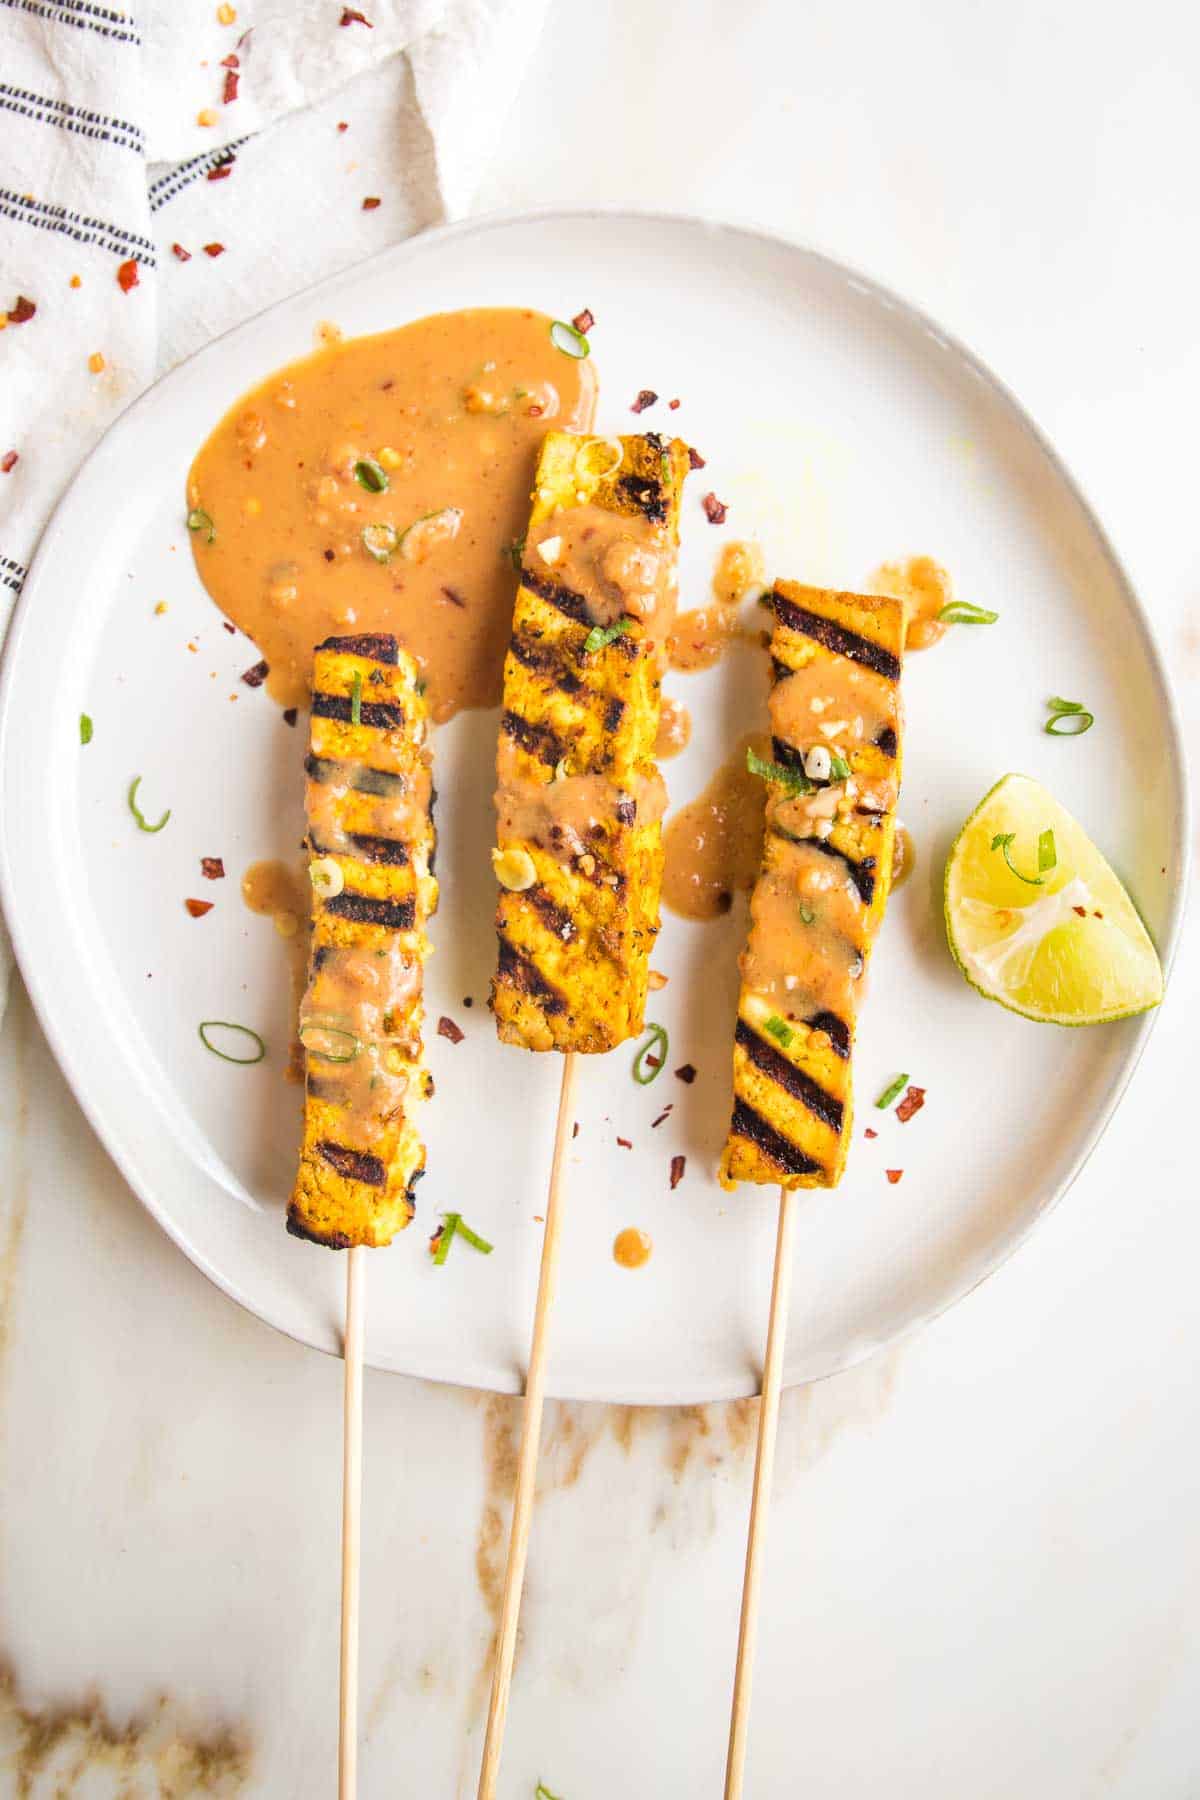 Vegan grilled tofu corn skewers with sauce on a plate.